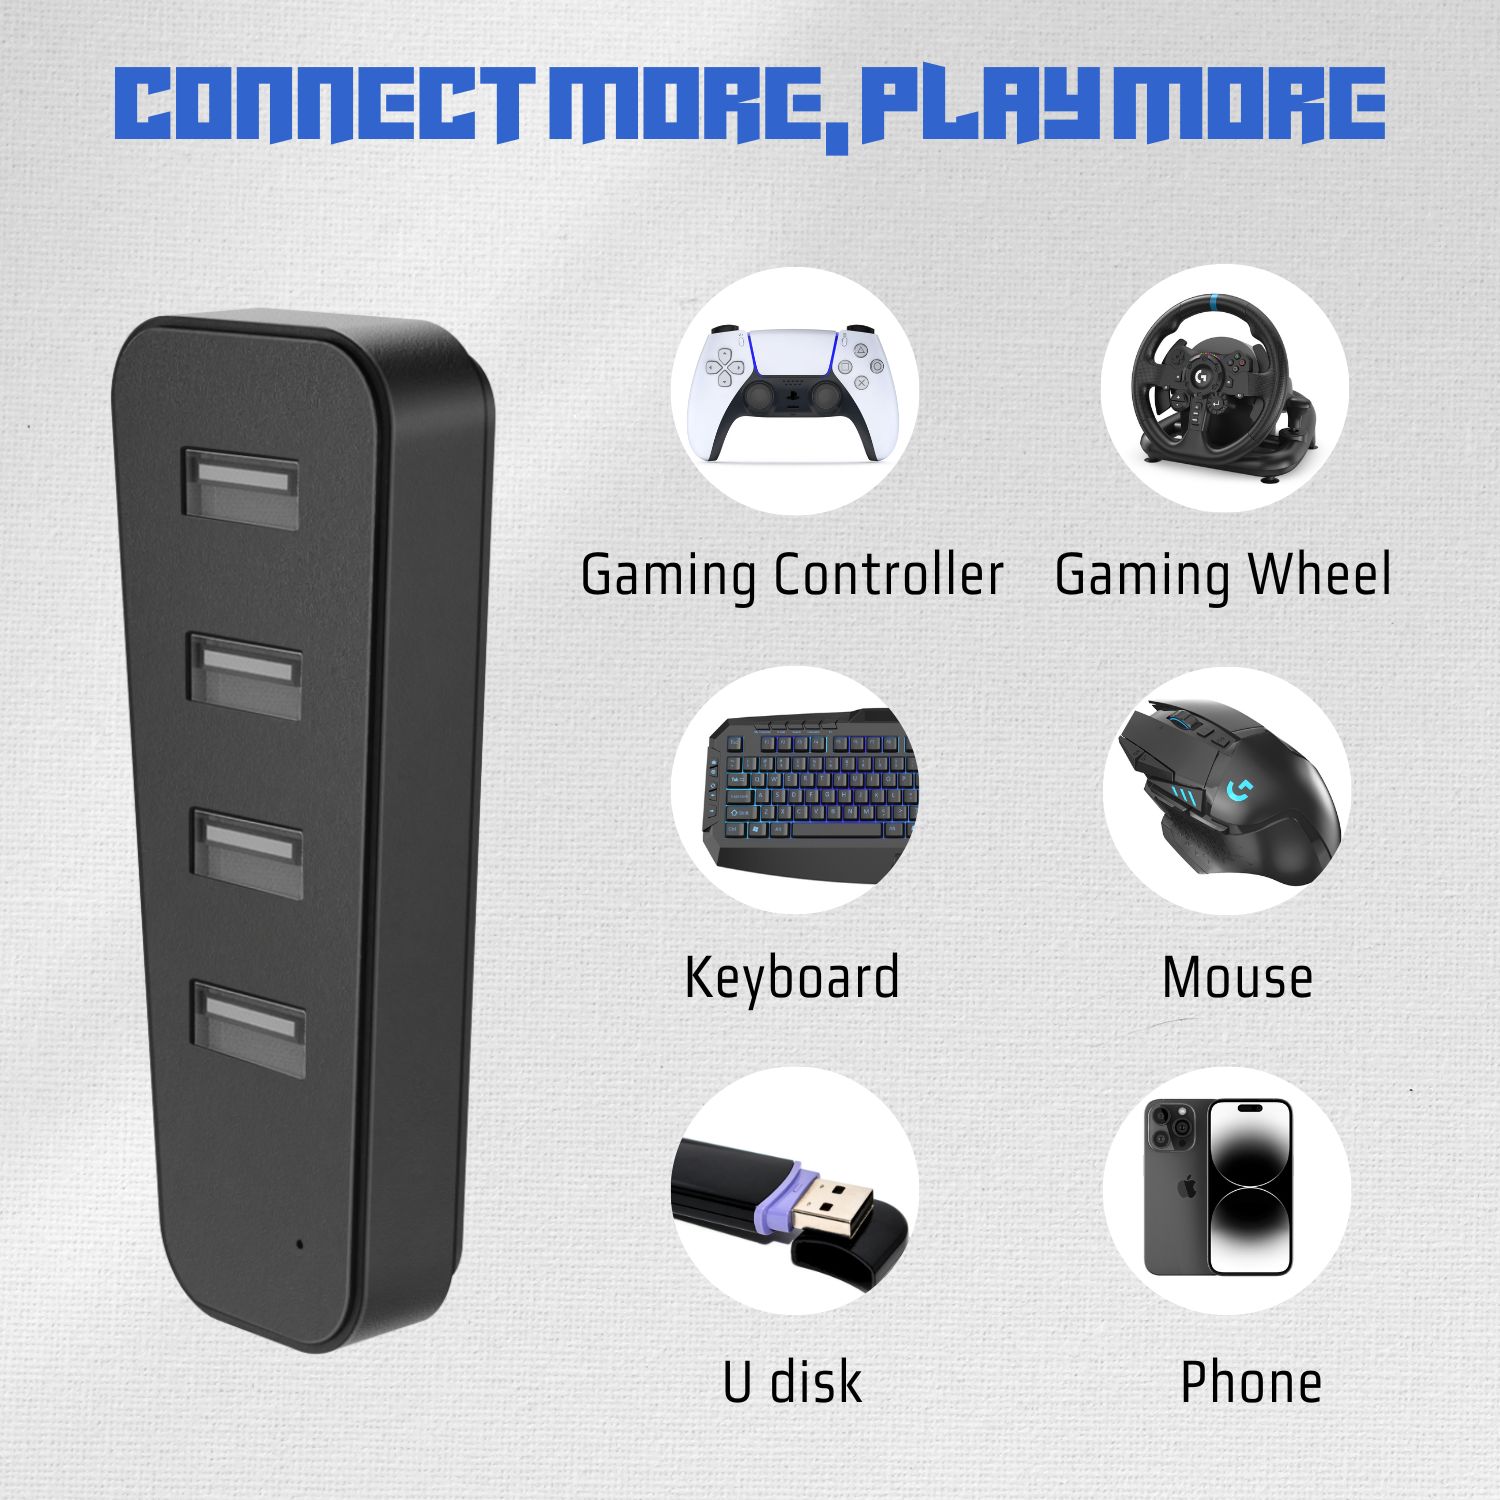 Simultaneous Connection: Our USB port adapter for PS5 Slim comes with high-speed 4x USB 2.0 ports that support multiple device connections and operation compatible with PS5 accessories